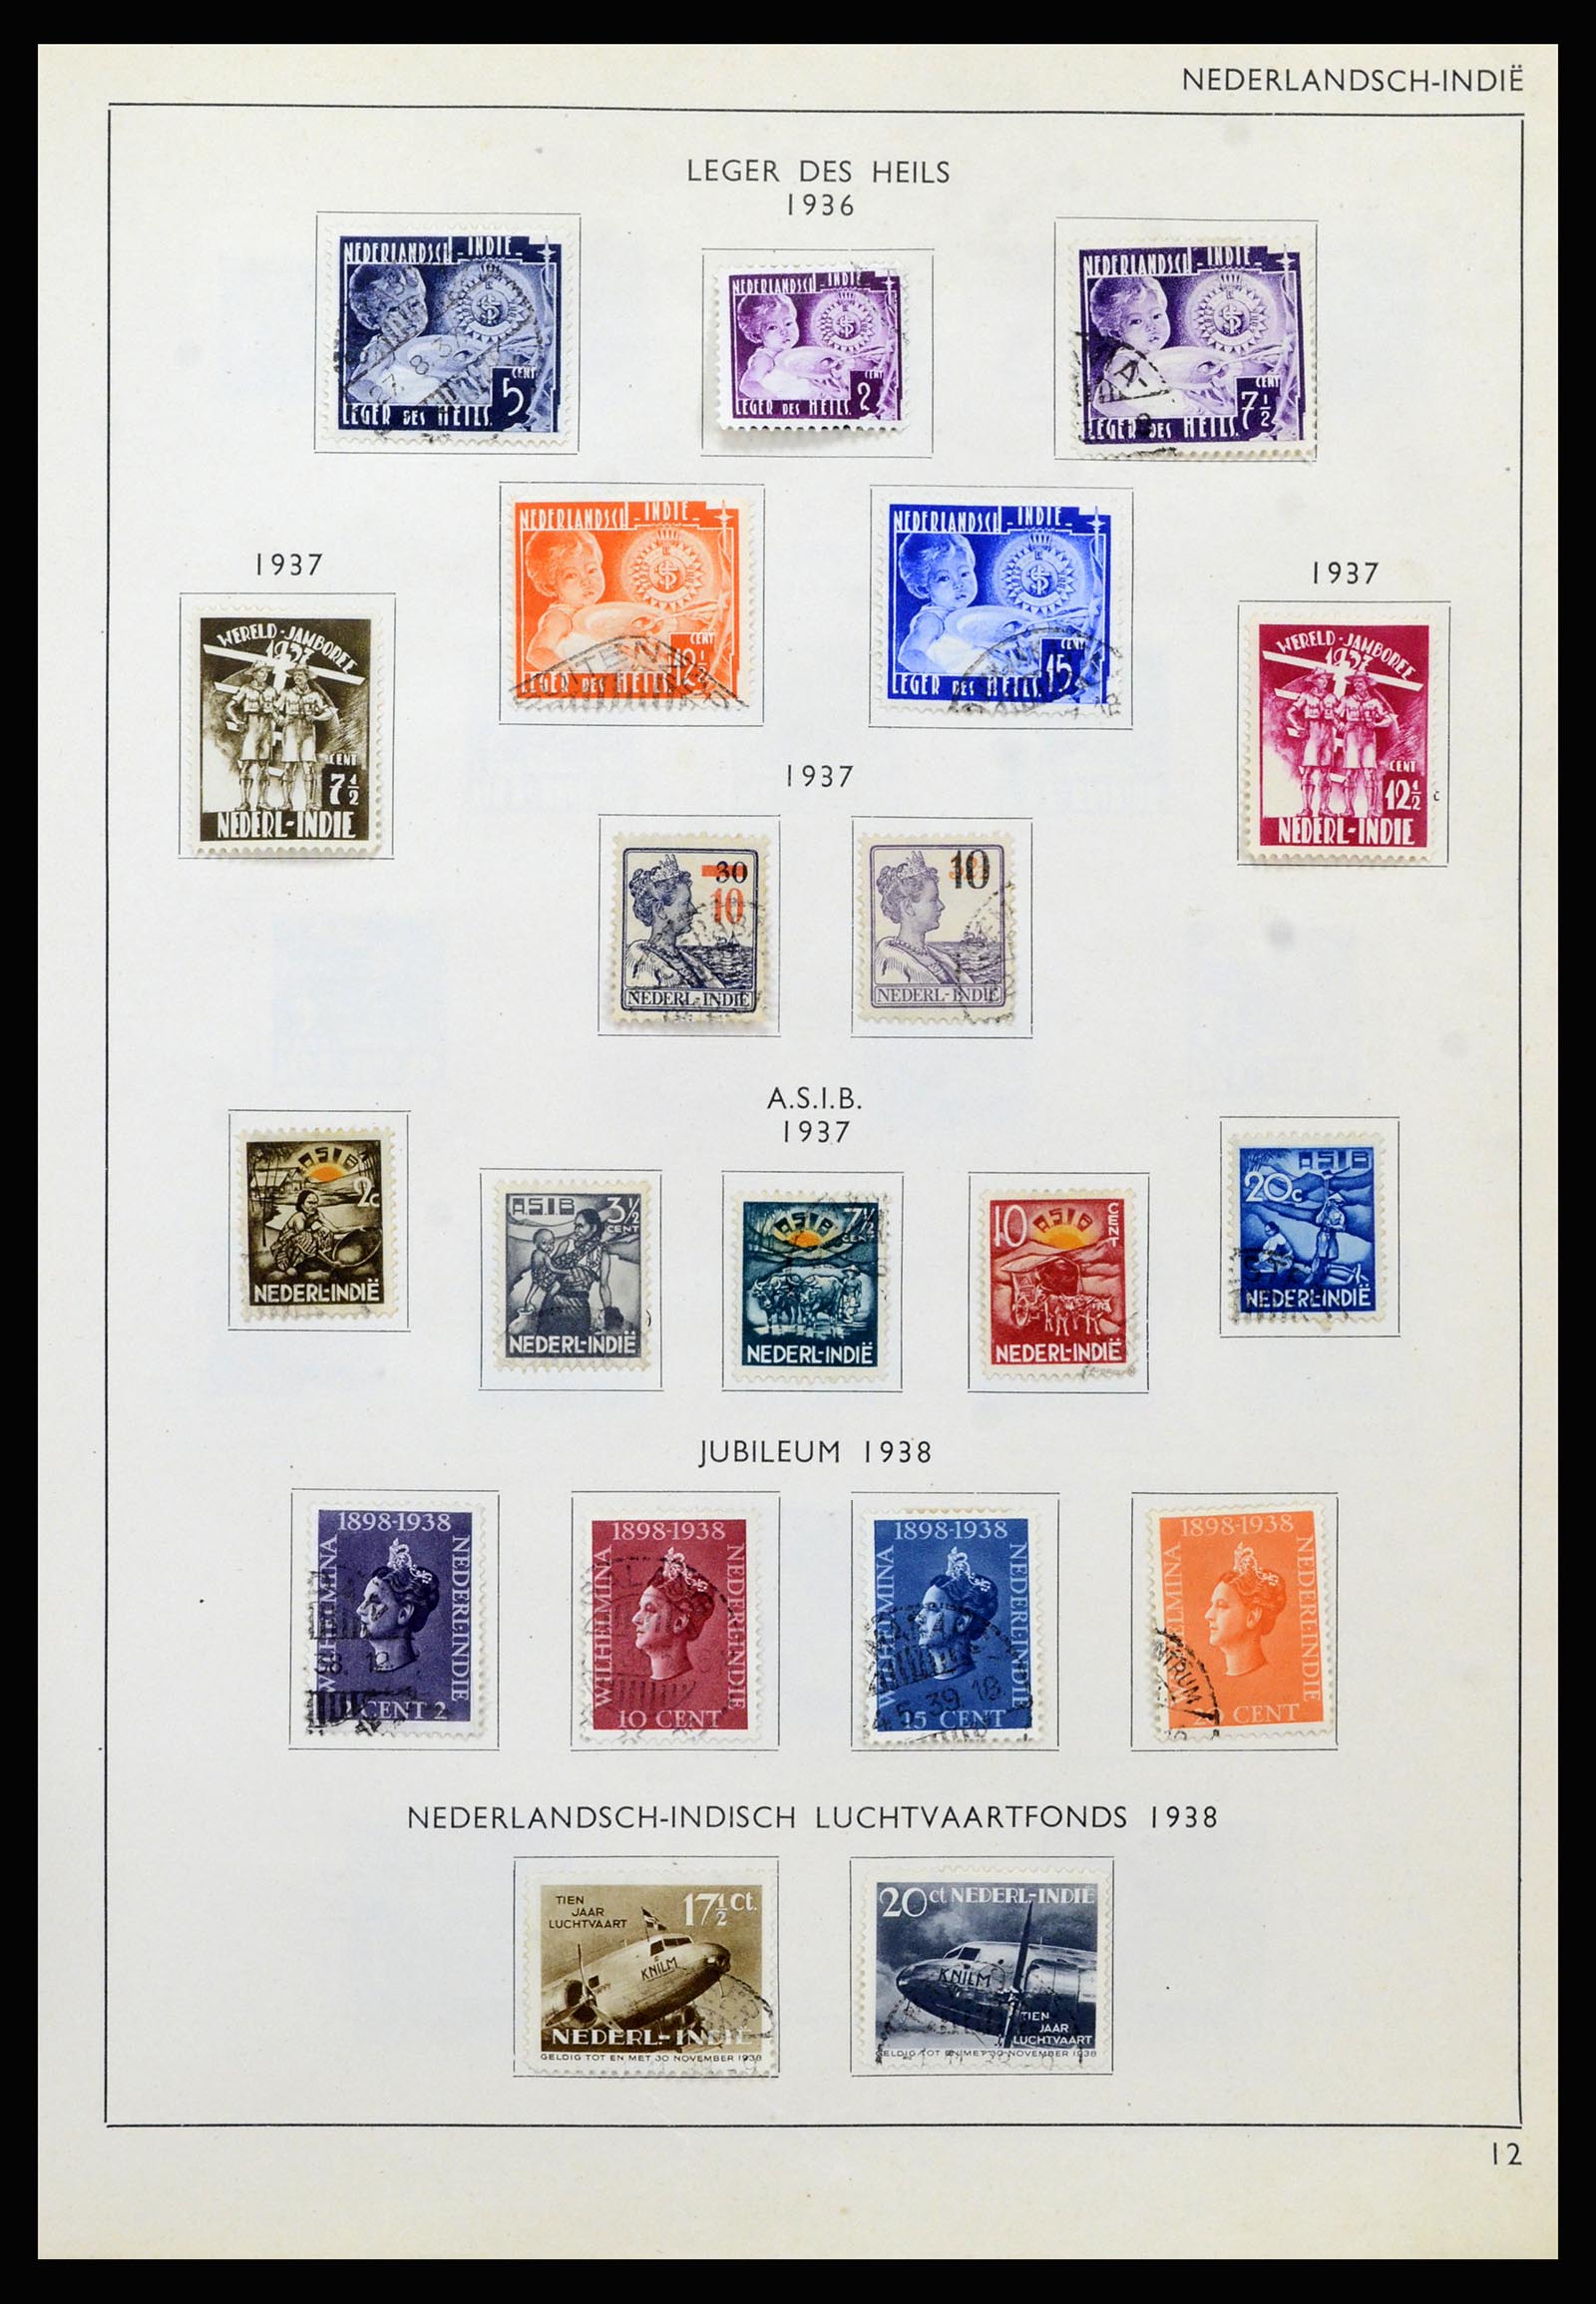 37217 012 - Stamp collection 37217 Dutch territories 1864-1975.